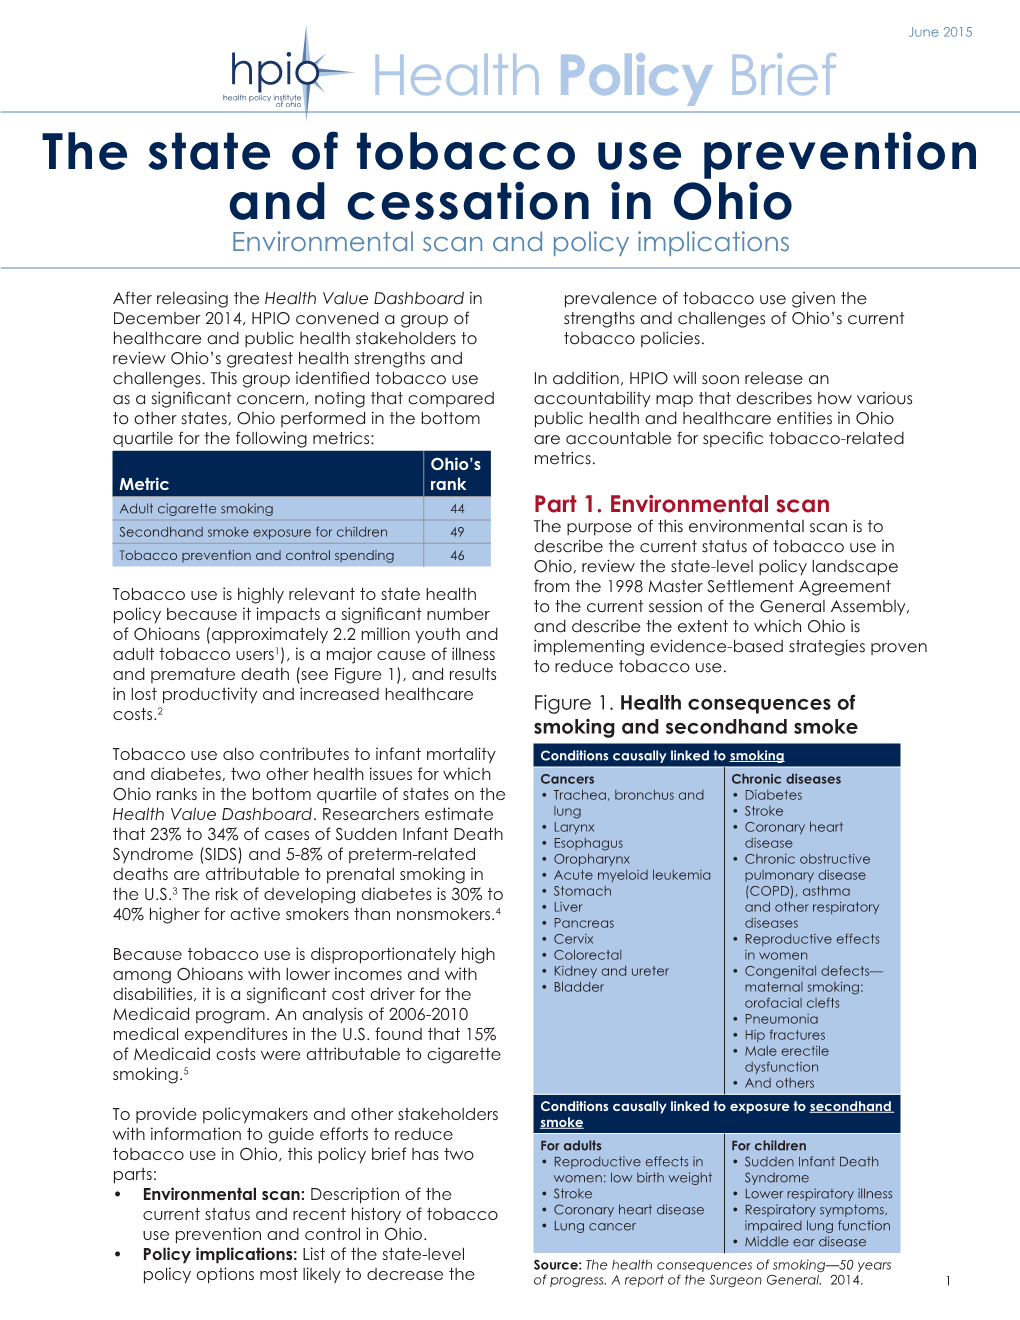 Health Policy Brief the State of Tobacco Use Prevention and Cessation in Ohio Environmental Scan and Policy Implications